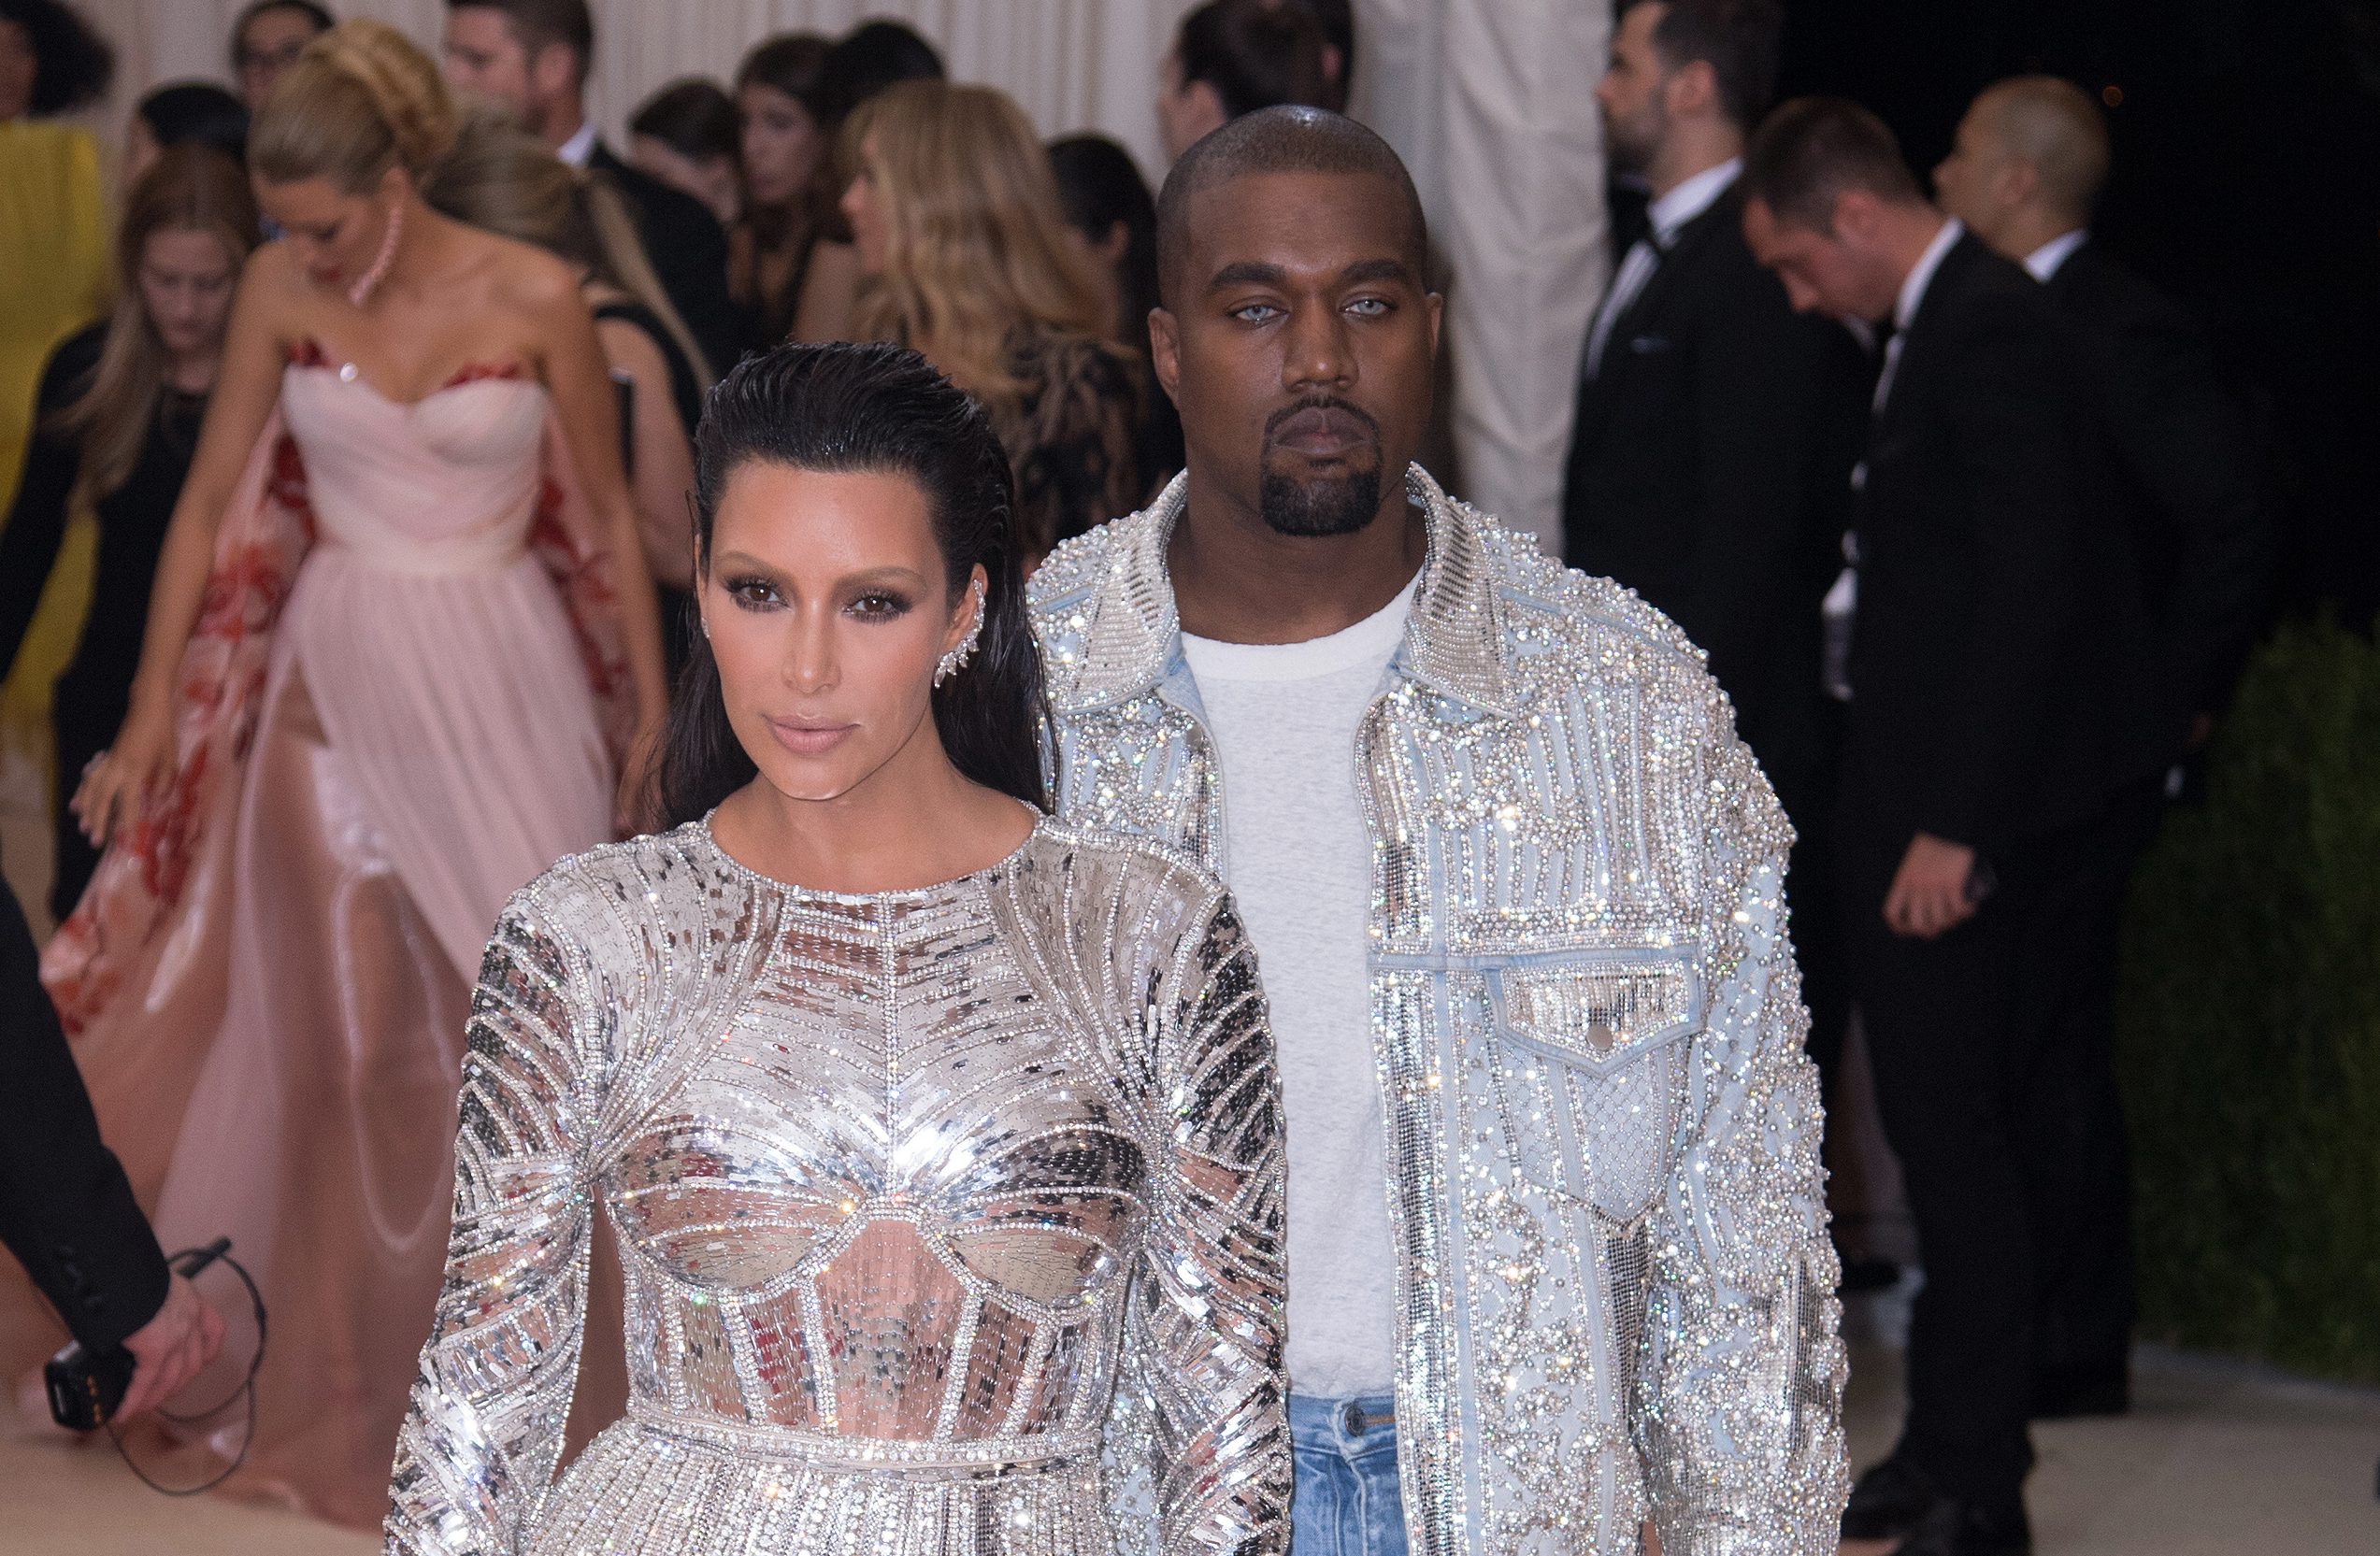 Kim Kardashian West's faceless Met Gala look was anything but incognito